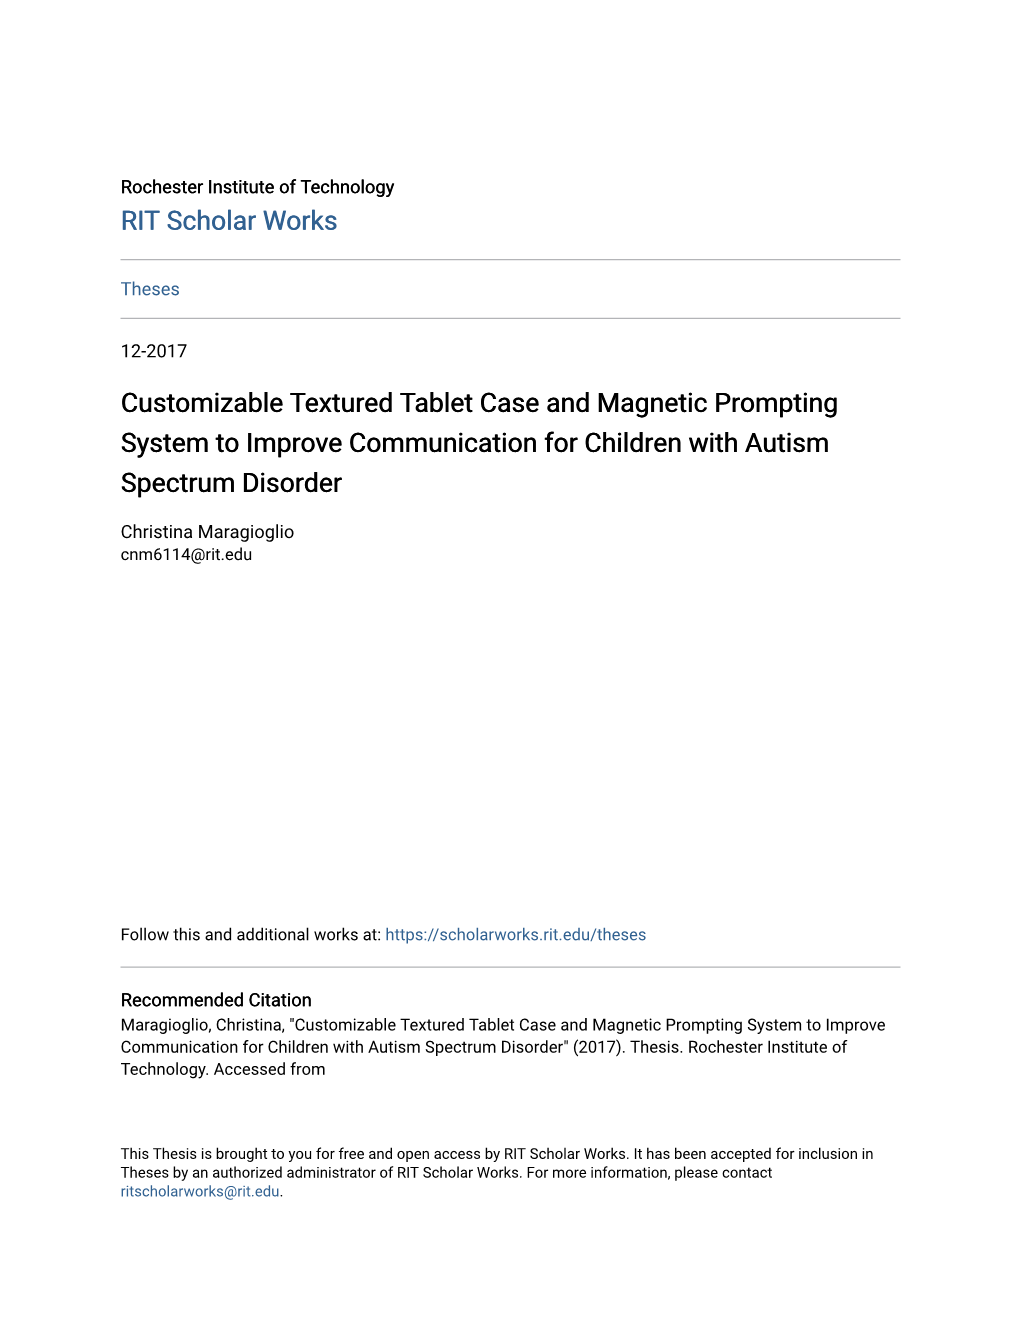 Customizable Textured Tablet Case and Magnetic Prompting System to Improve Communication for Children with Autism Spectrum Disorder